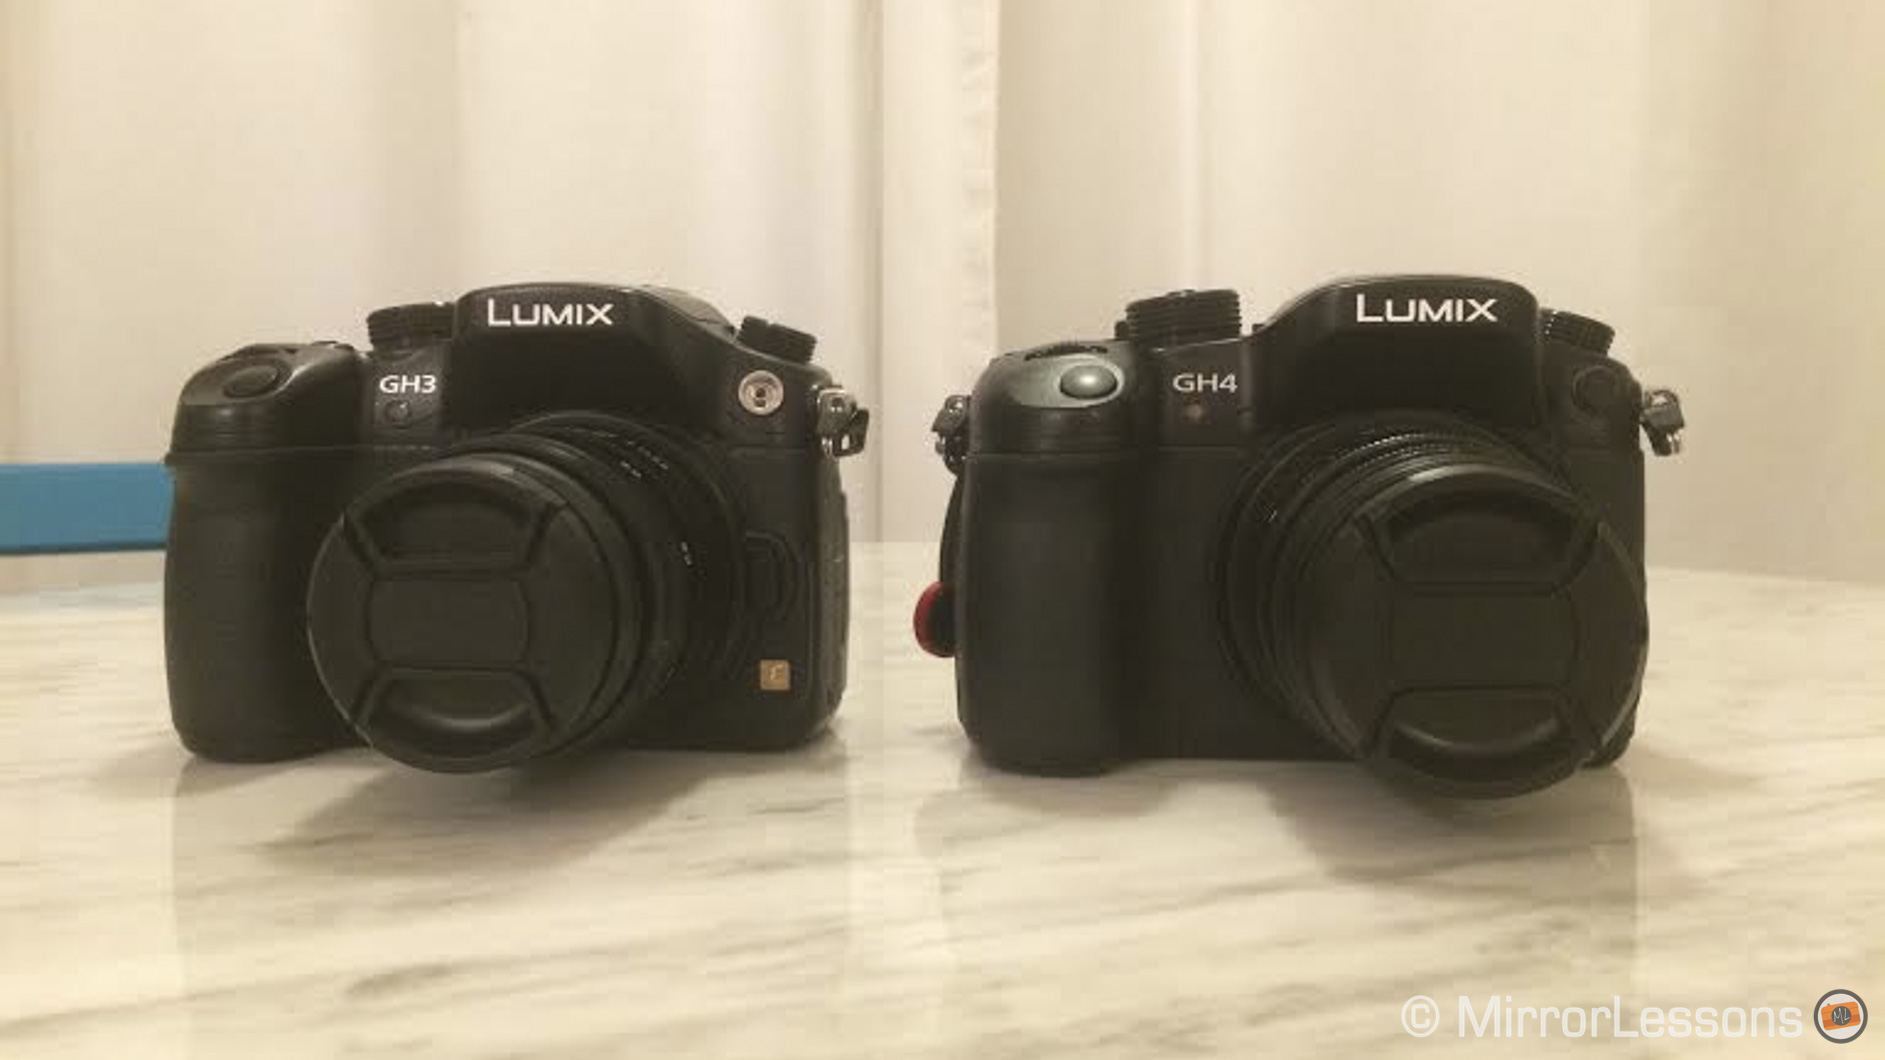 which lumix should i buy